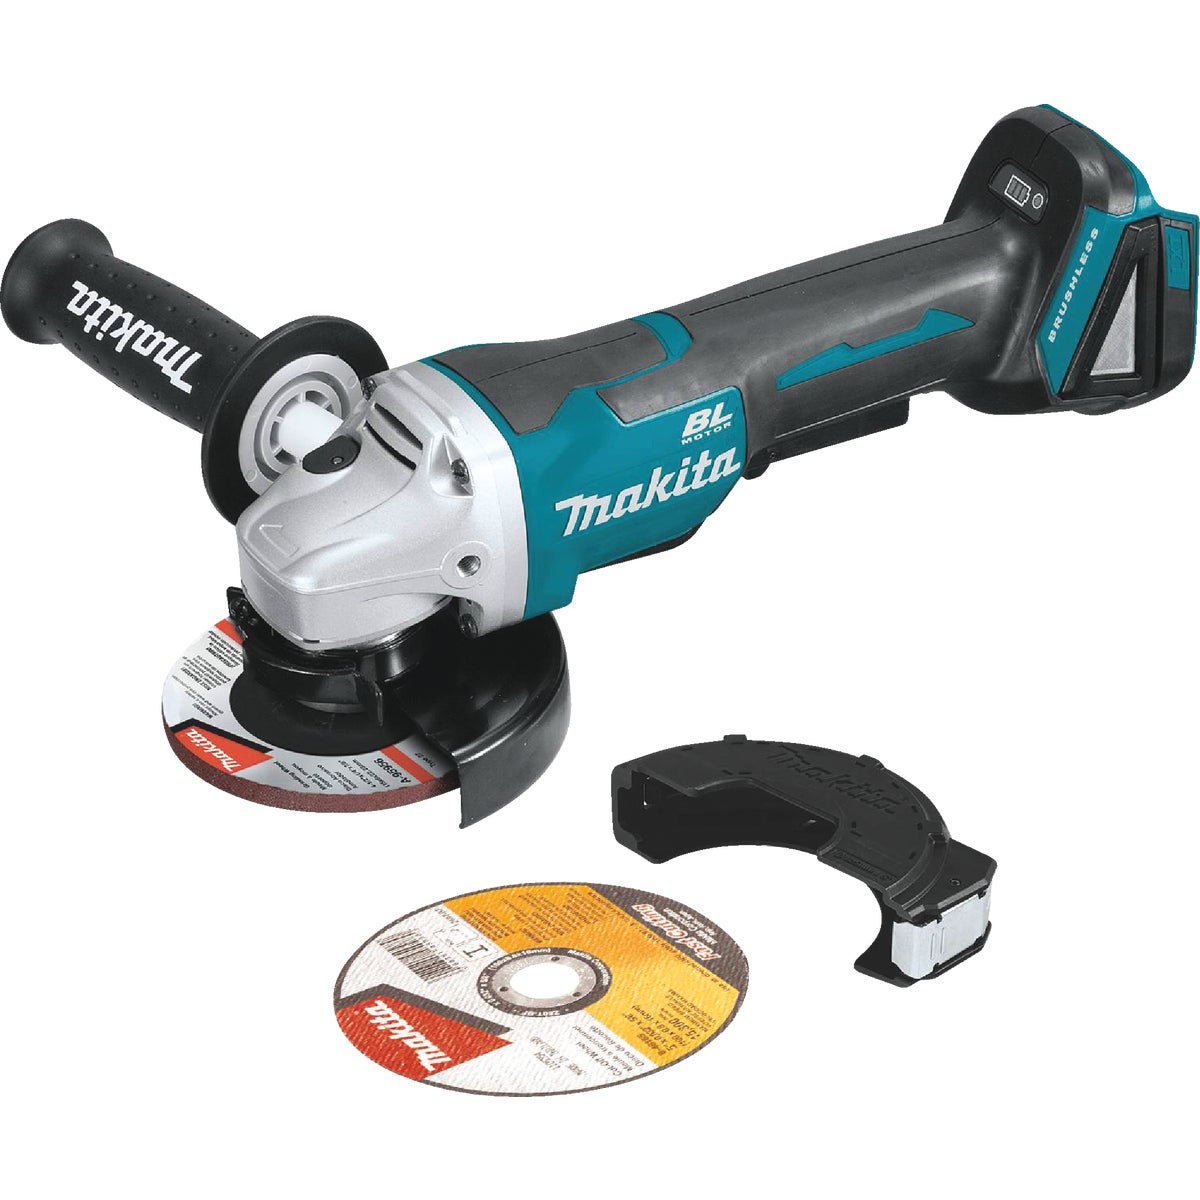 Makita 18 Volt LXT Lithium-Ion 4-1/2 In. - 5 In. Brushless Cordless Paddle Switch Angle Grinder (Tool Only)